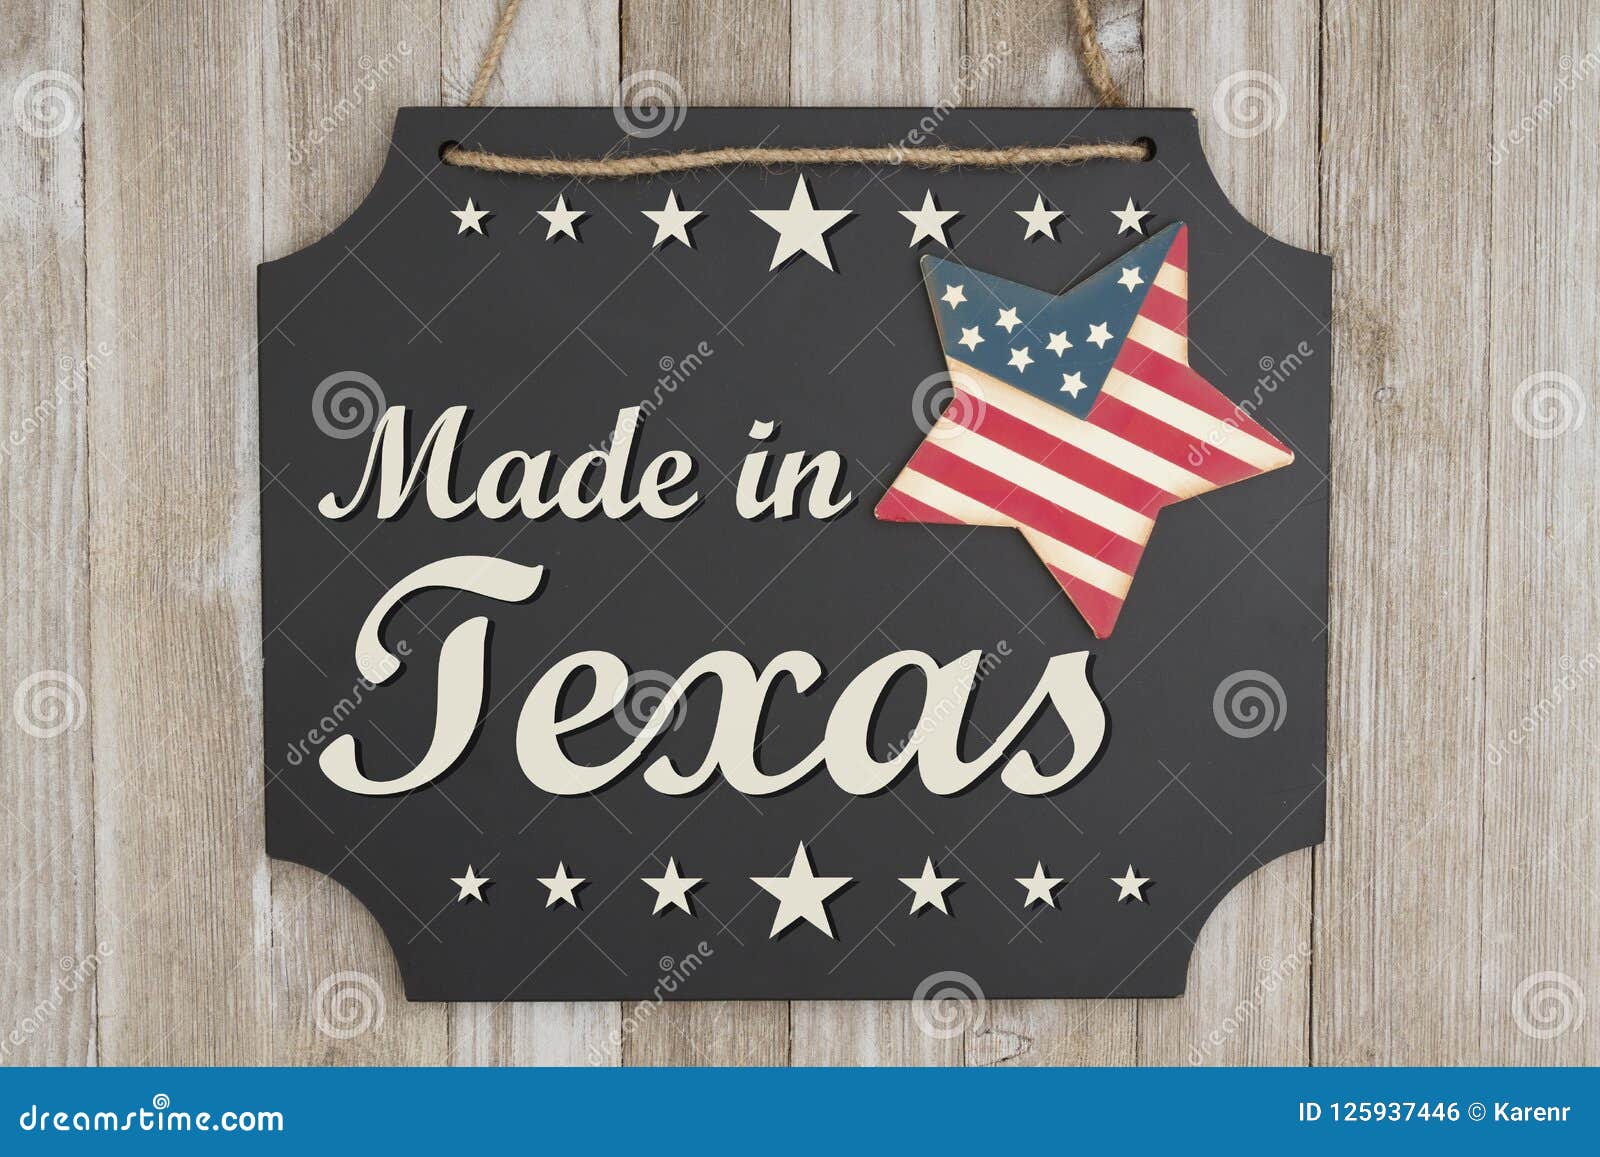 united states of america made in texas message